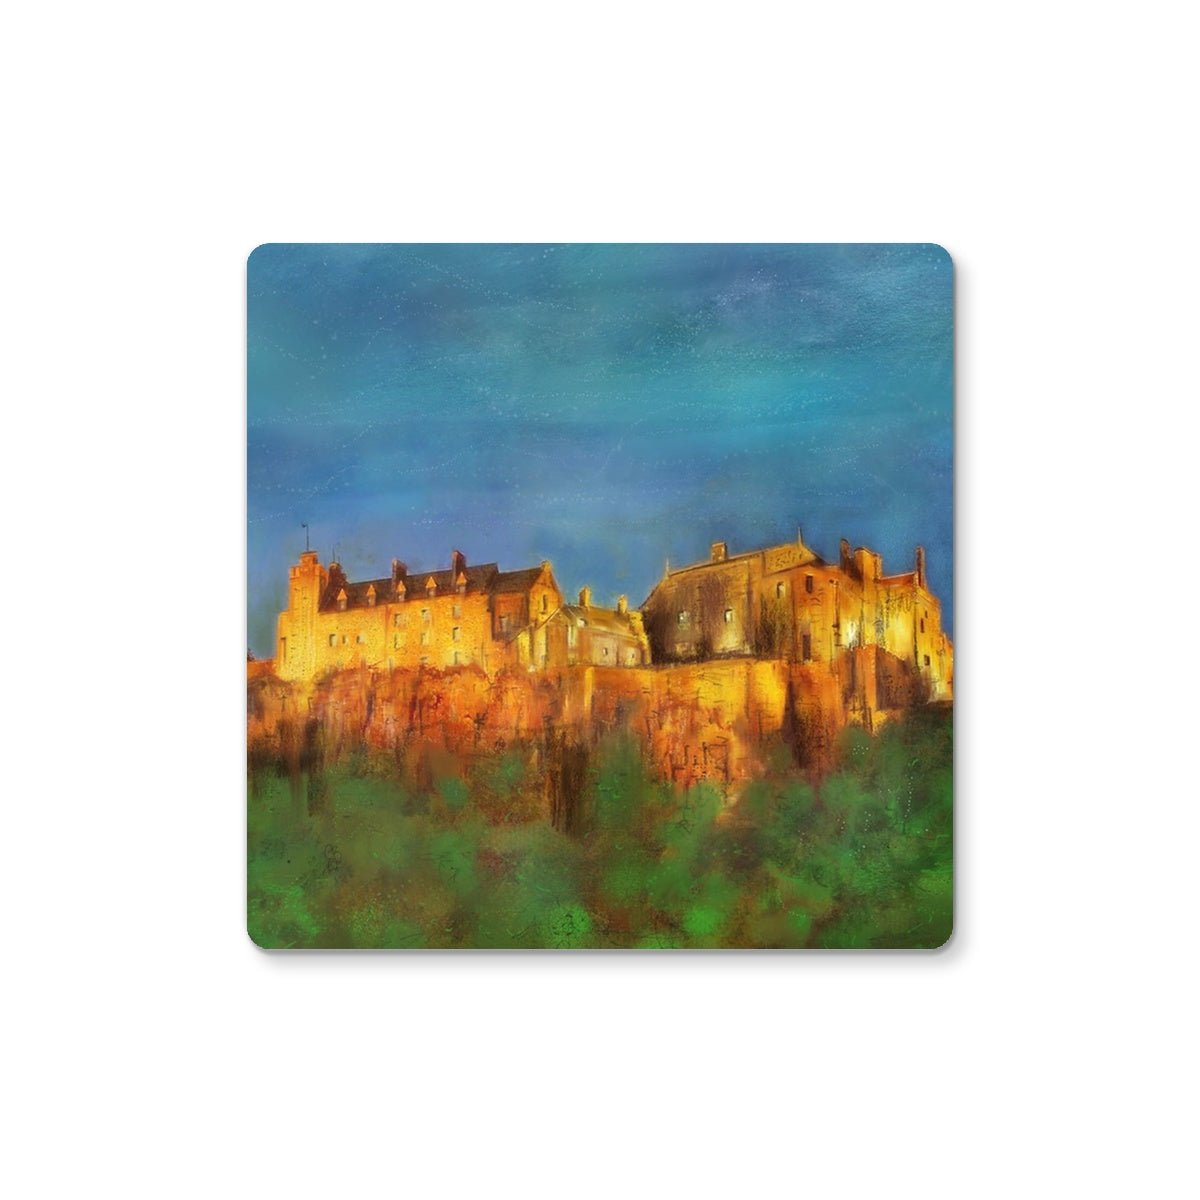 Stirling Castle Art Gifts Coaster-Coasters-Scottish Castles Art Gallery-6 Coasters-Paintings, Prints, Homeware, Art Gifts From Scotland By Scottish Artist Kevin Hunter